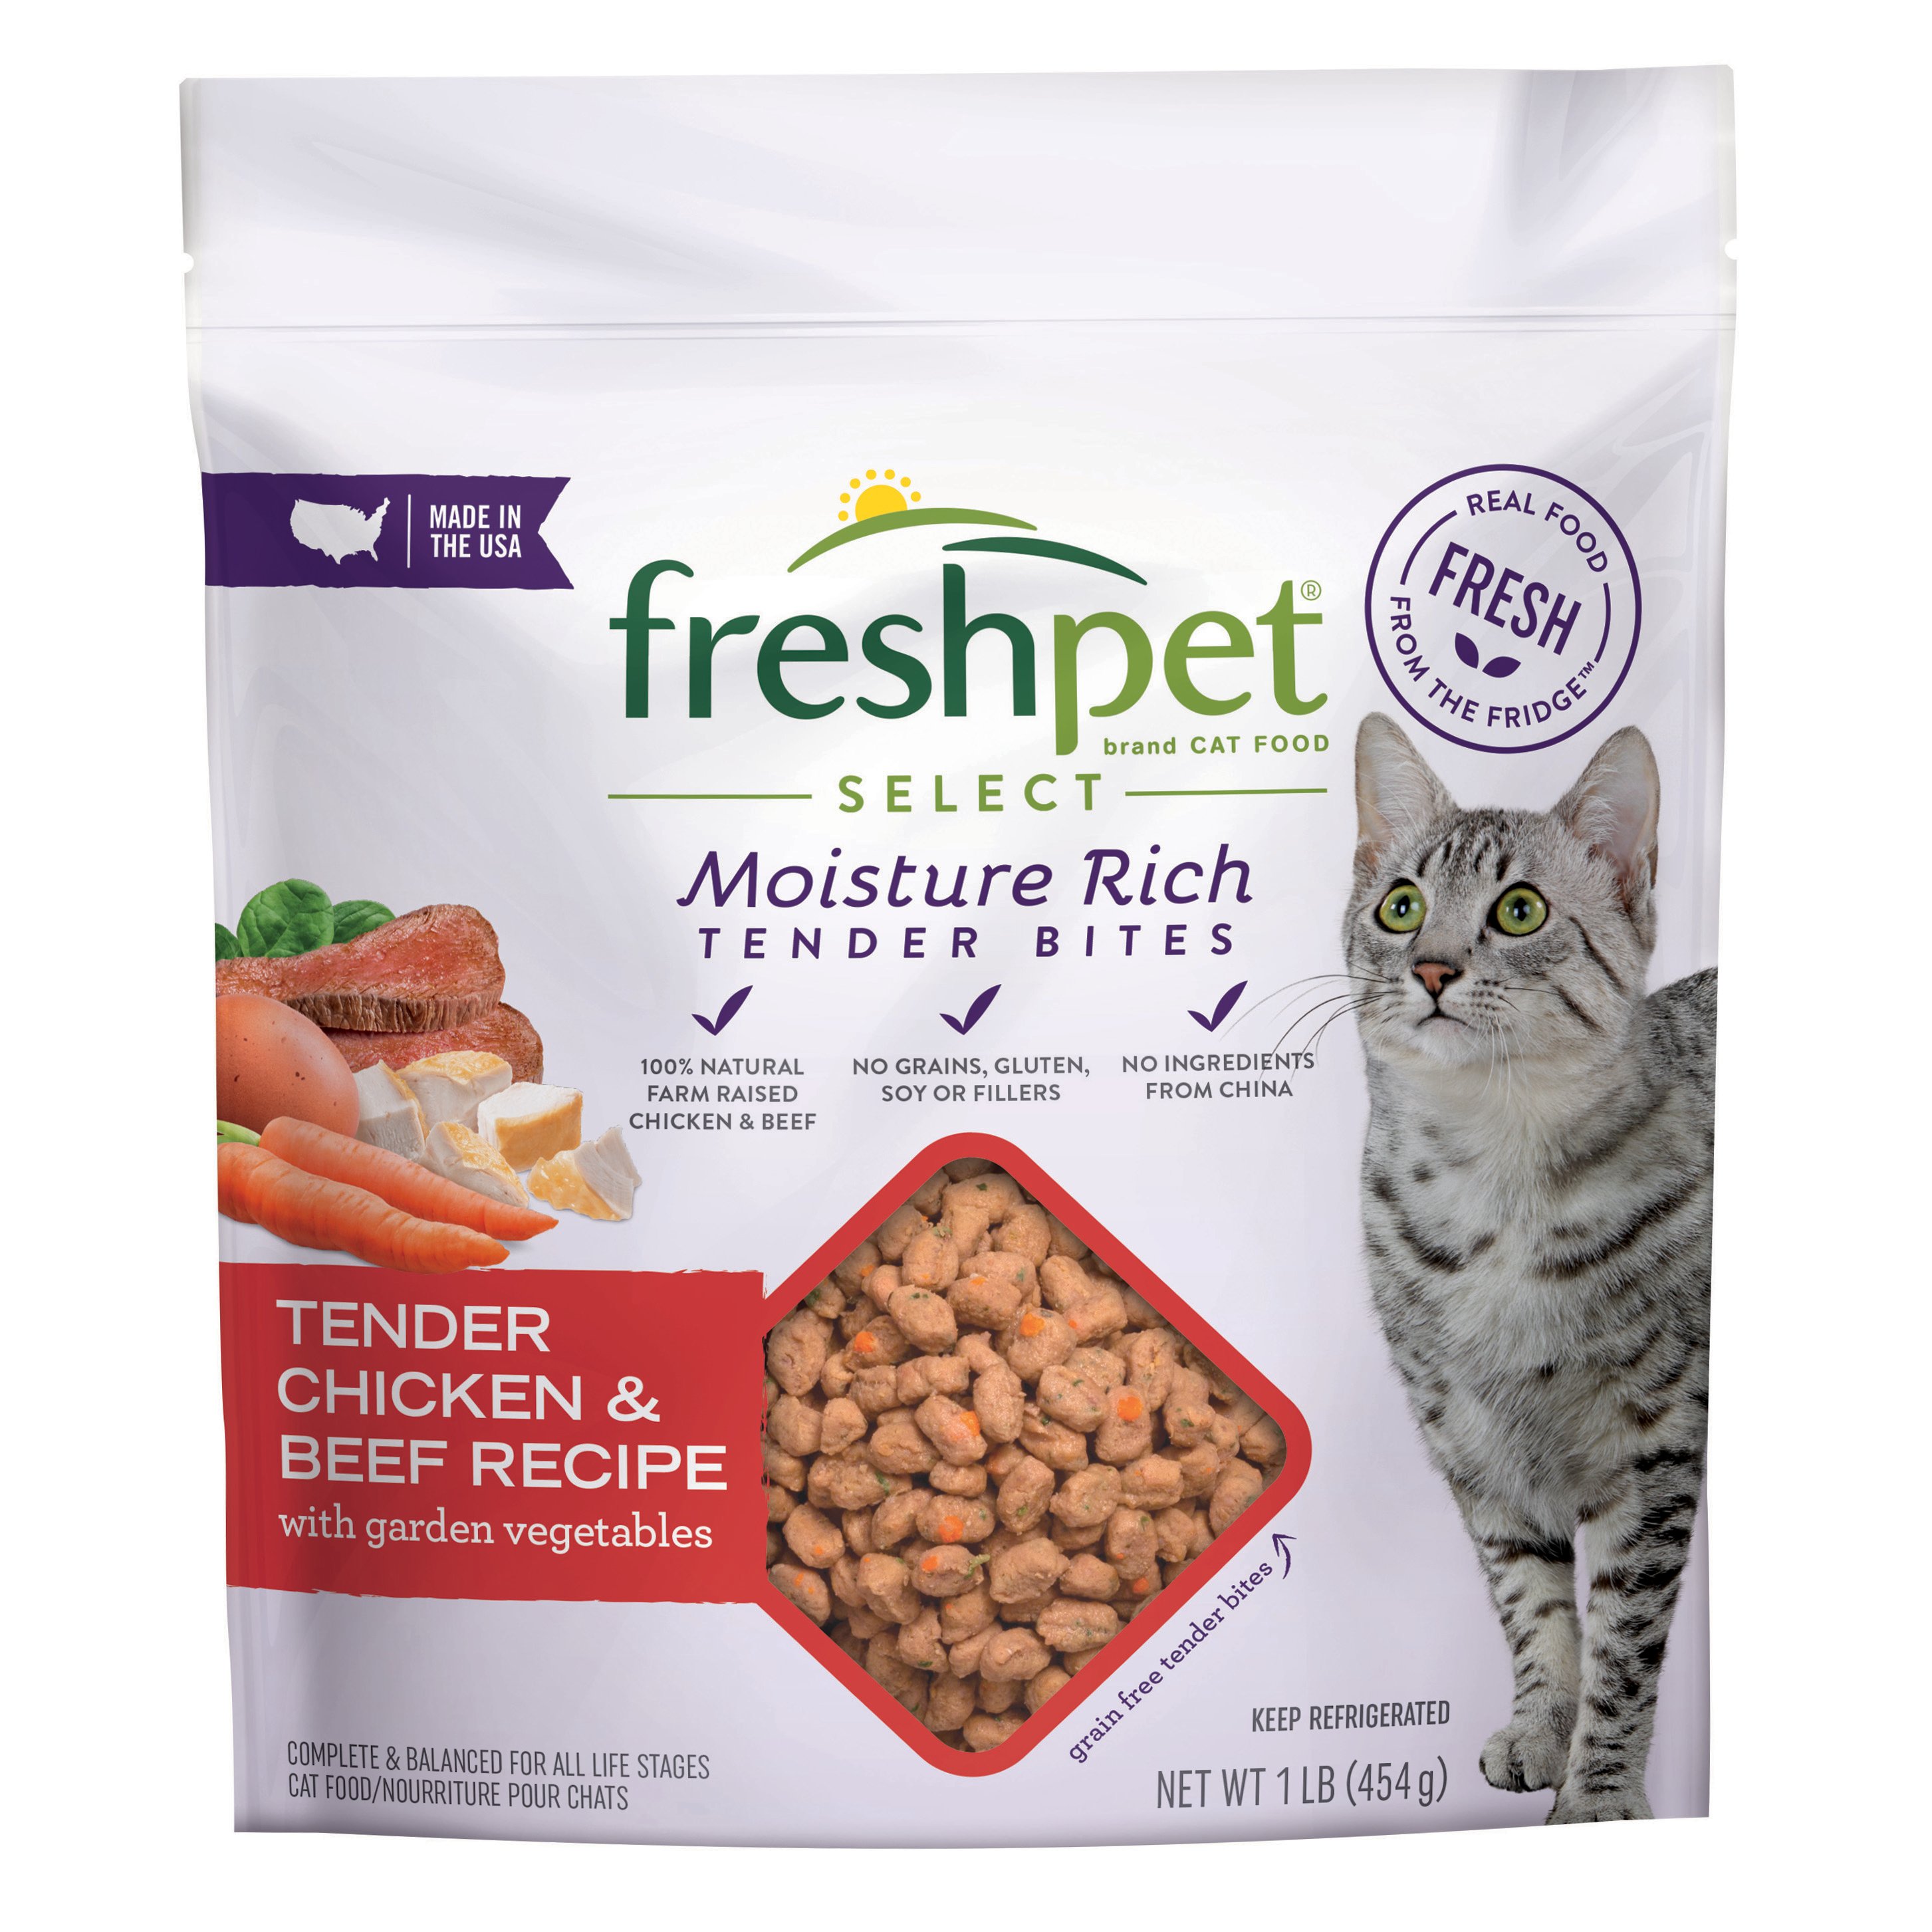 Freshpet Select Moisture Rich Tender Chicken And Beef Recipe Cat Food